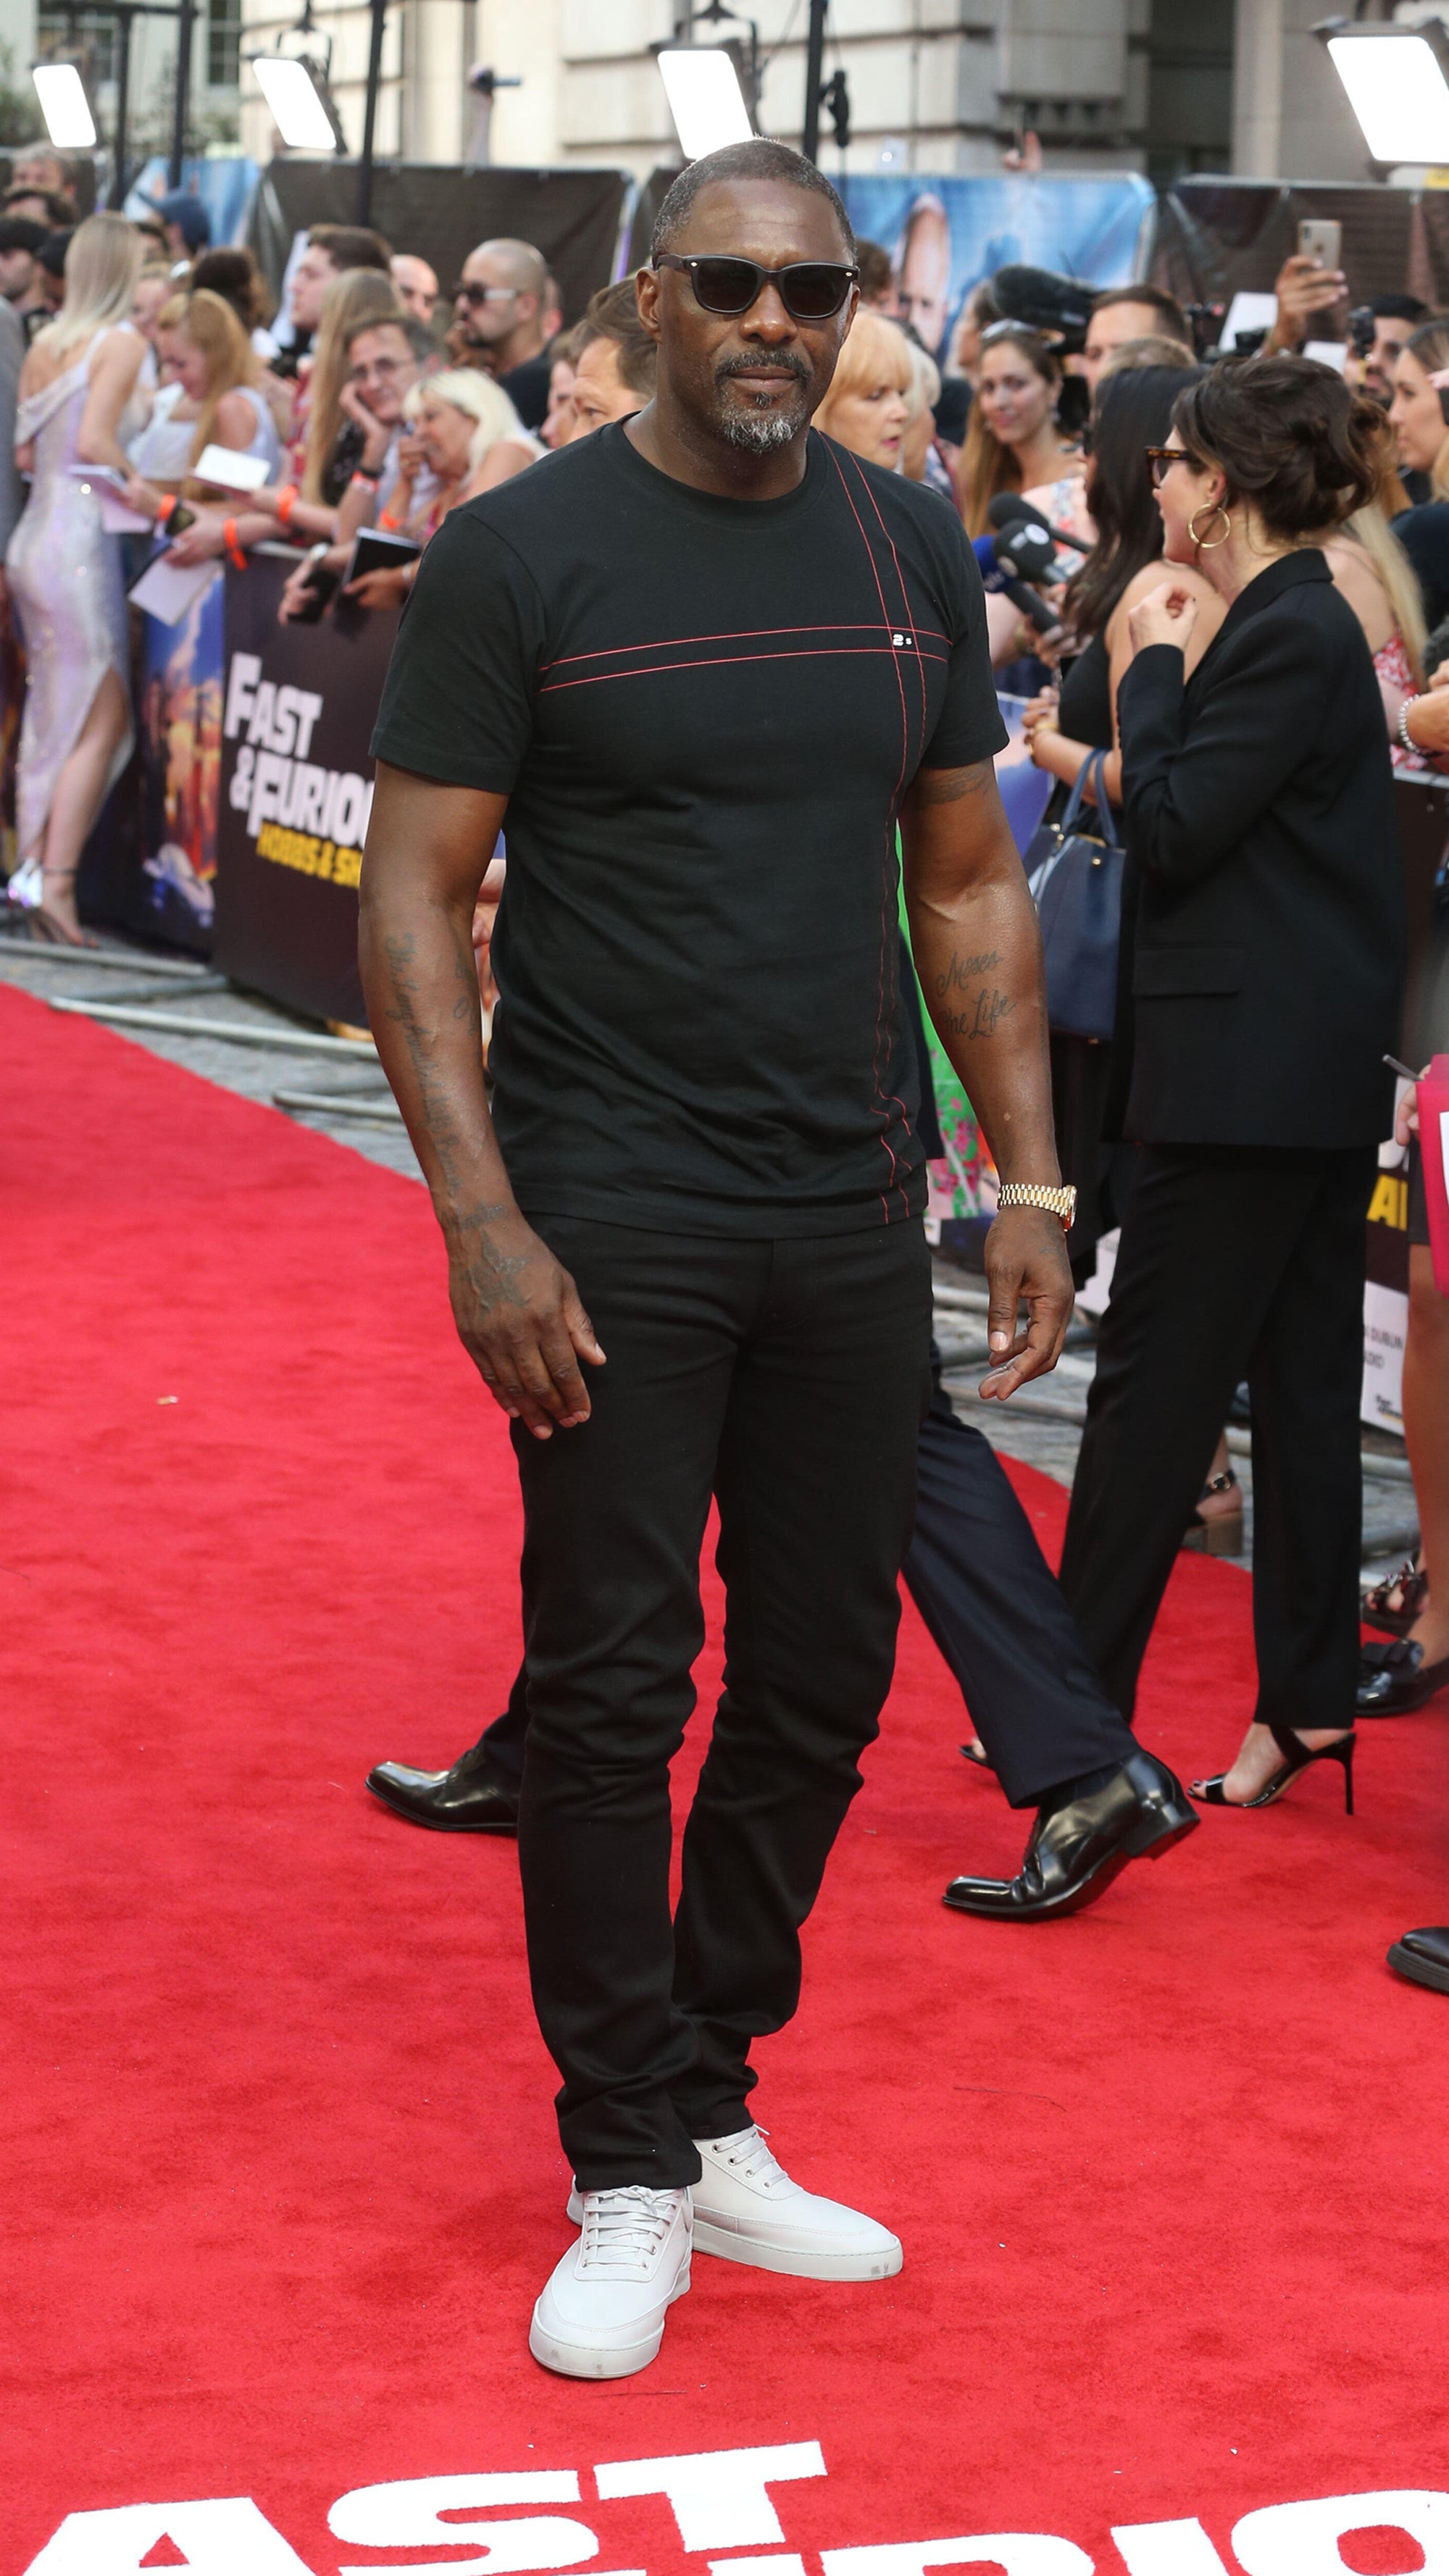 Idris Elba wearing trainers on the red carpet